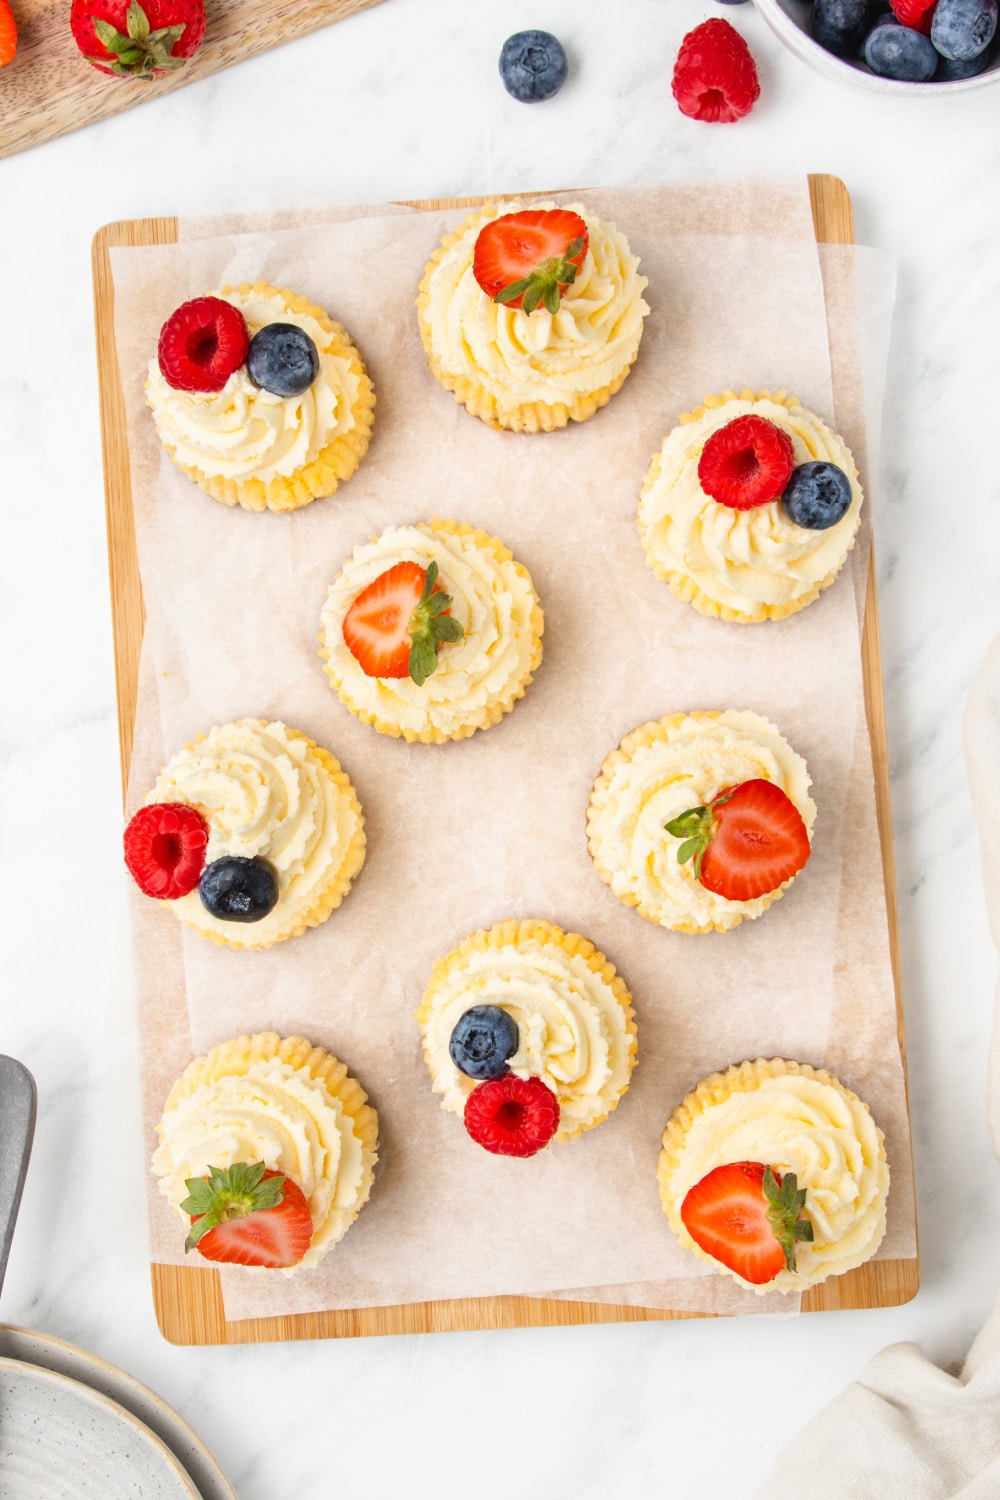 Mini Cheesecakes topped with strawberries, blue berries, and raspberries on white parchment paper.